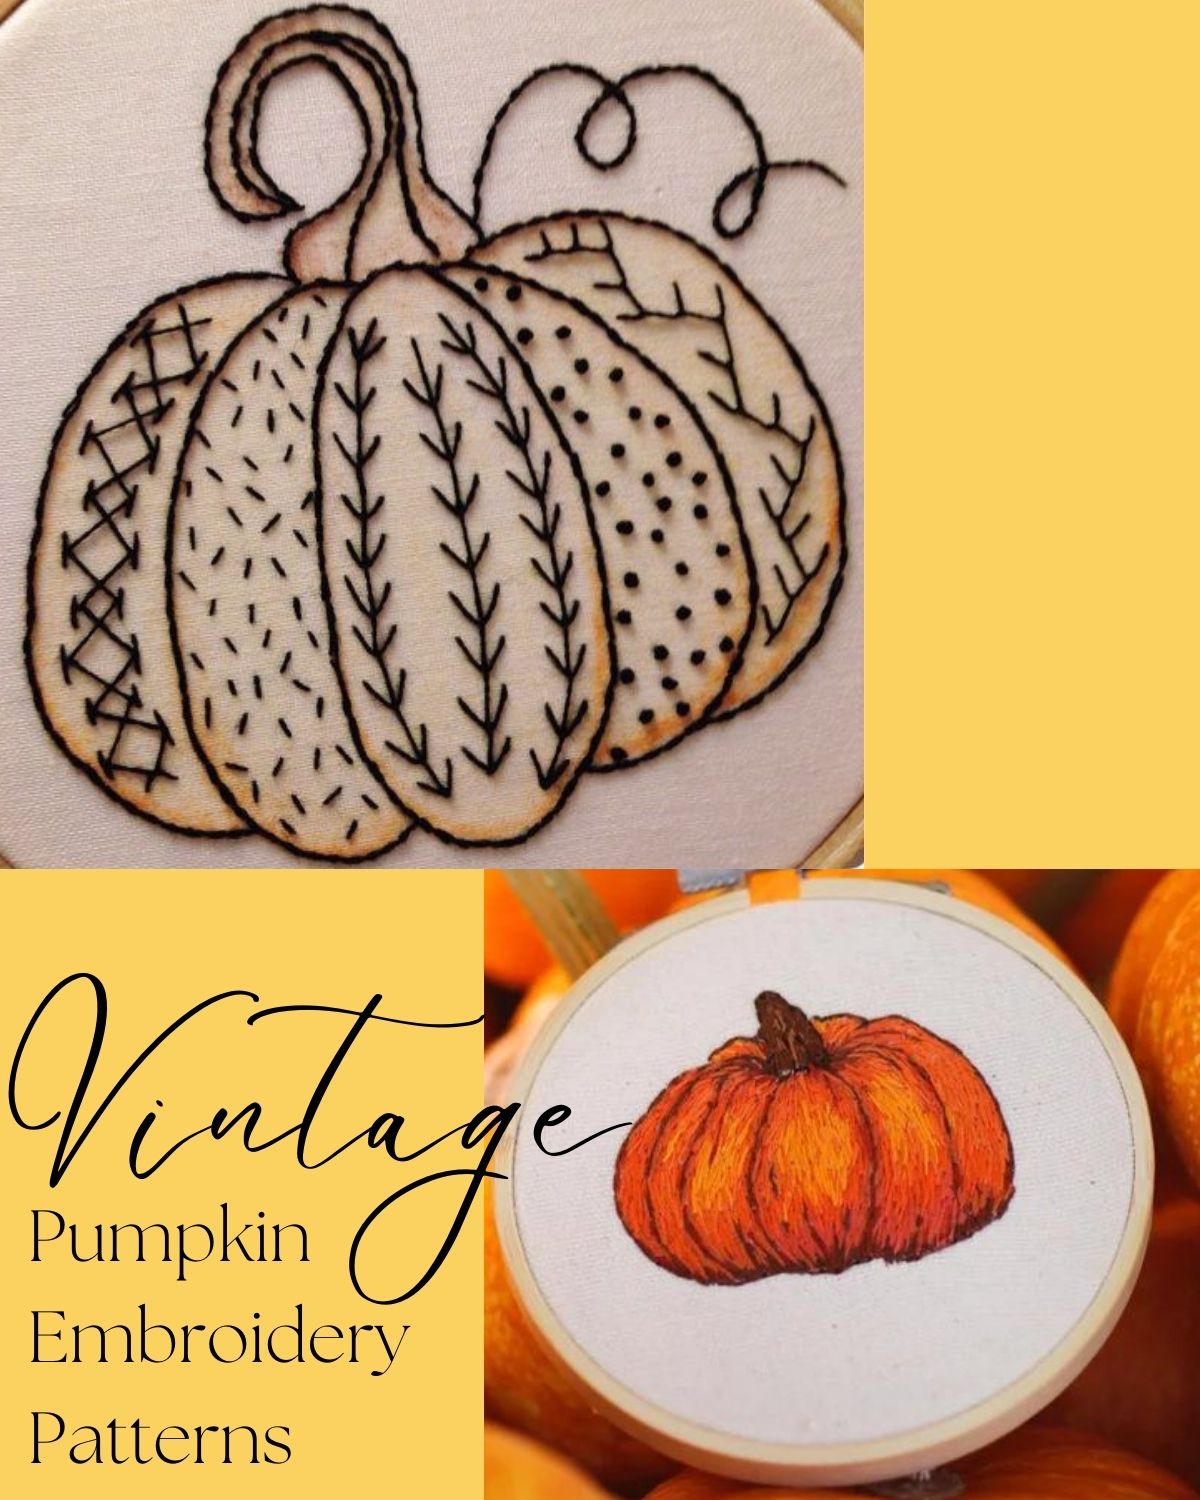 Two vintage style embroidered pumpkins